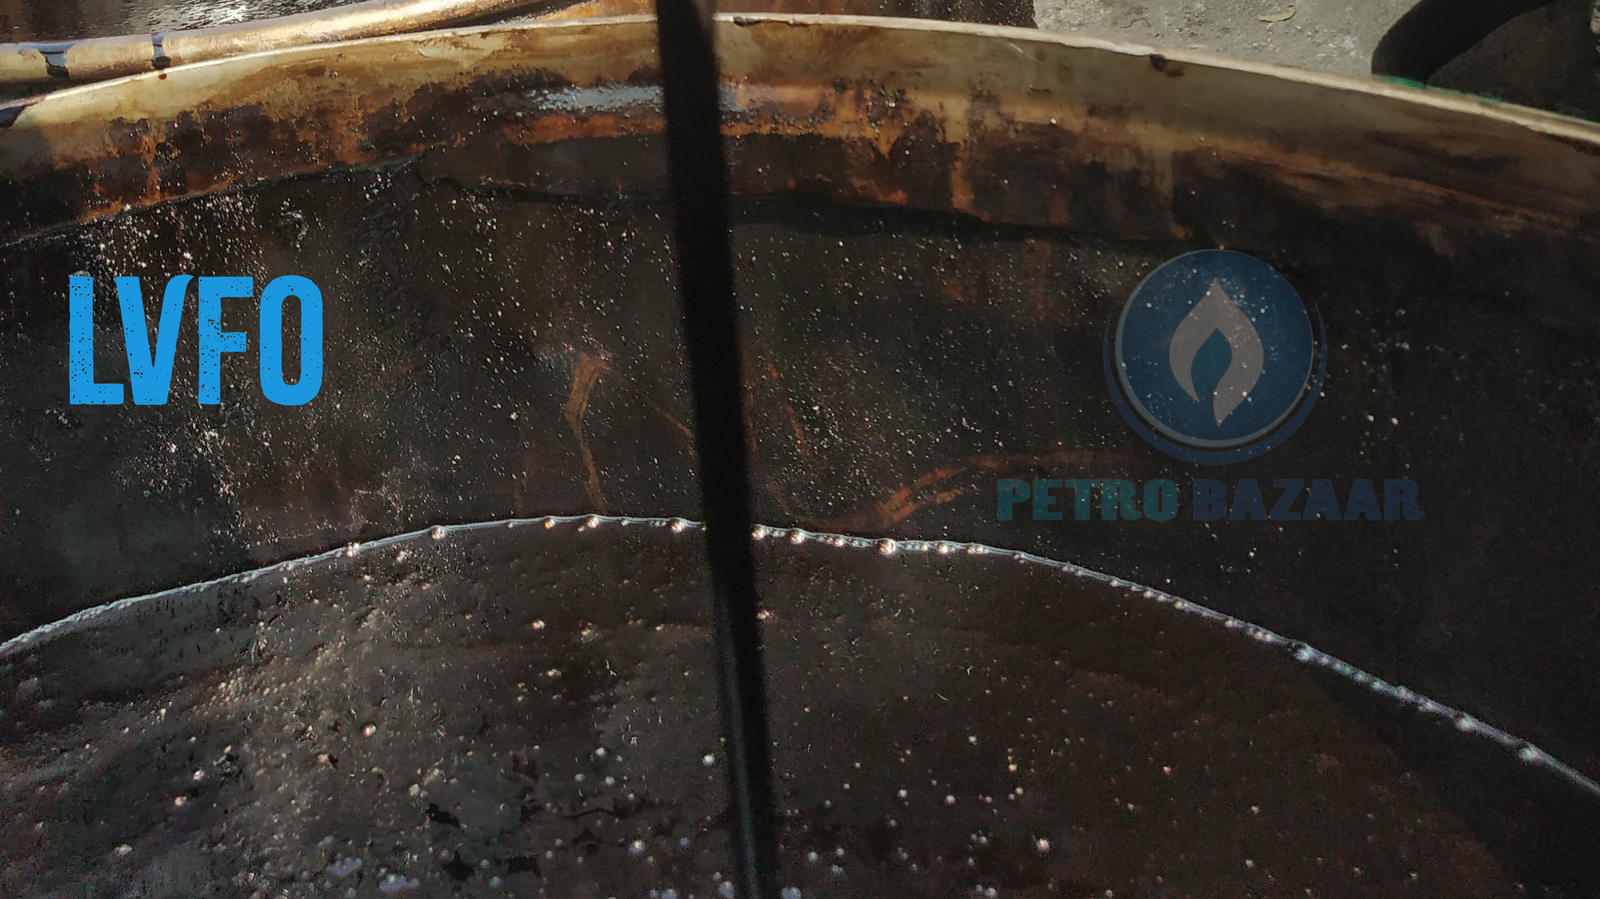 Image shows low viscosity fuel oil (lvfo) flowing from tanker into barrel. Lvfo is a low viscosity graded furnace oil used for boiler firing.